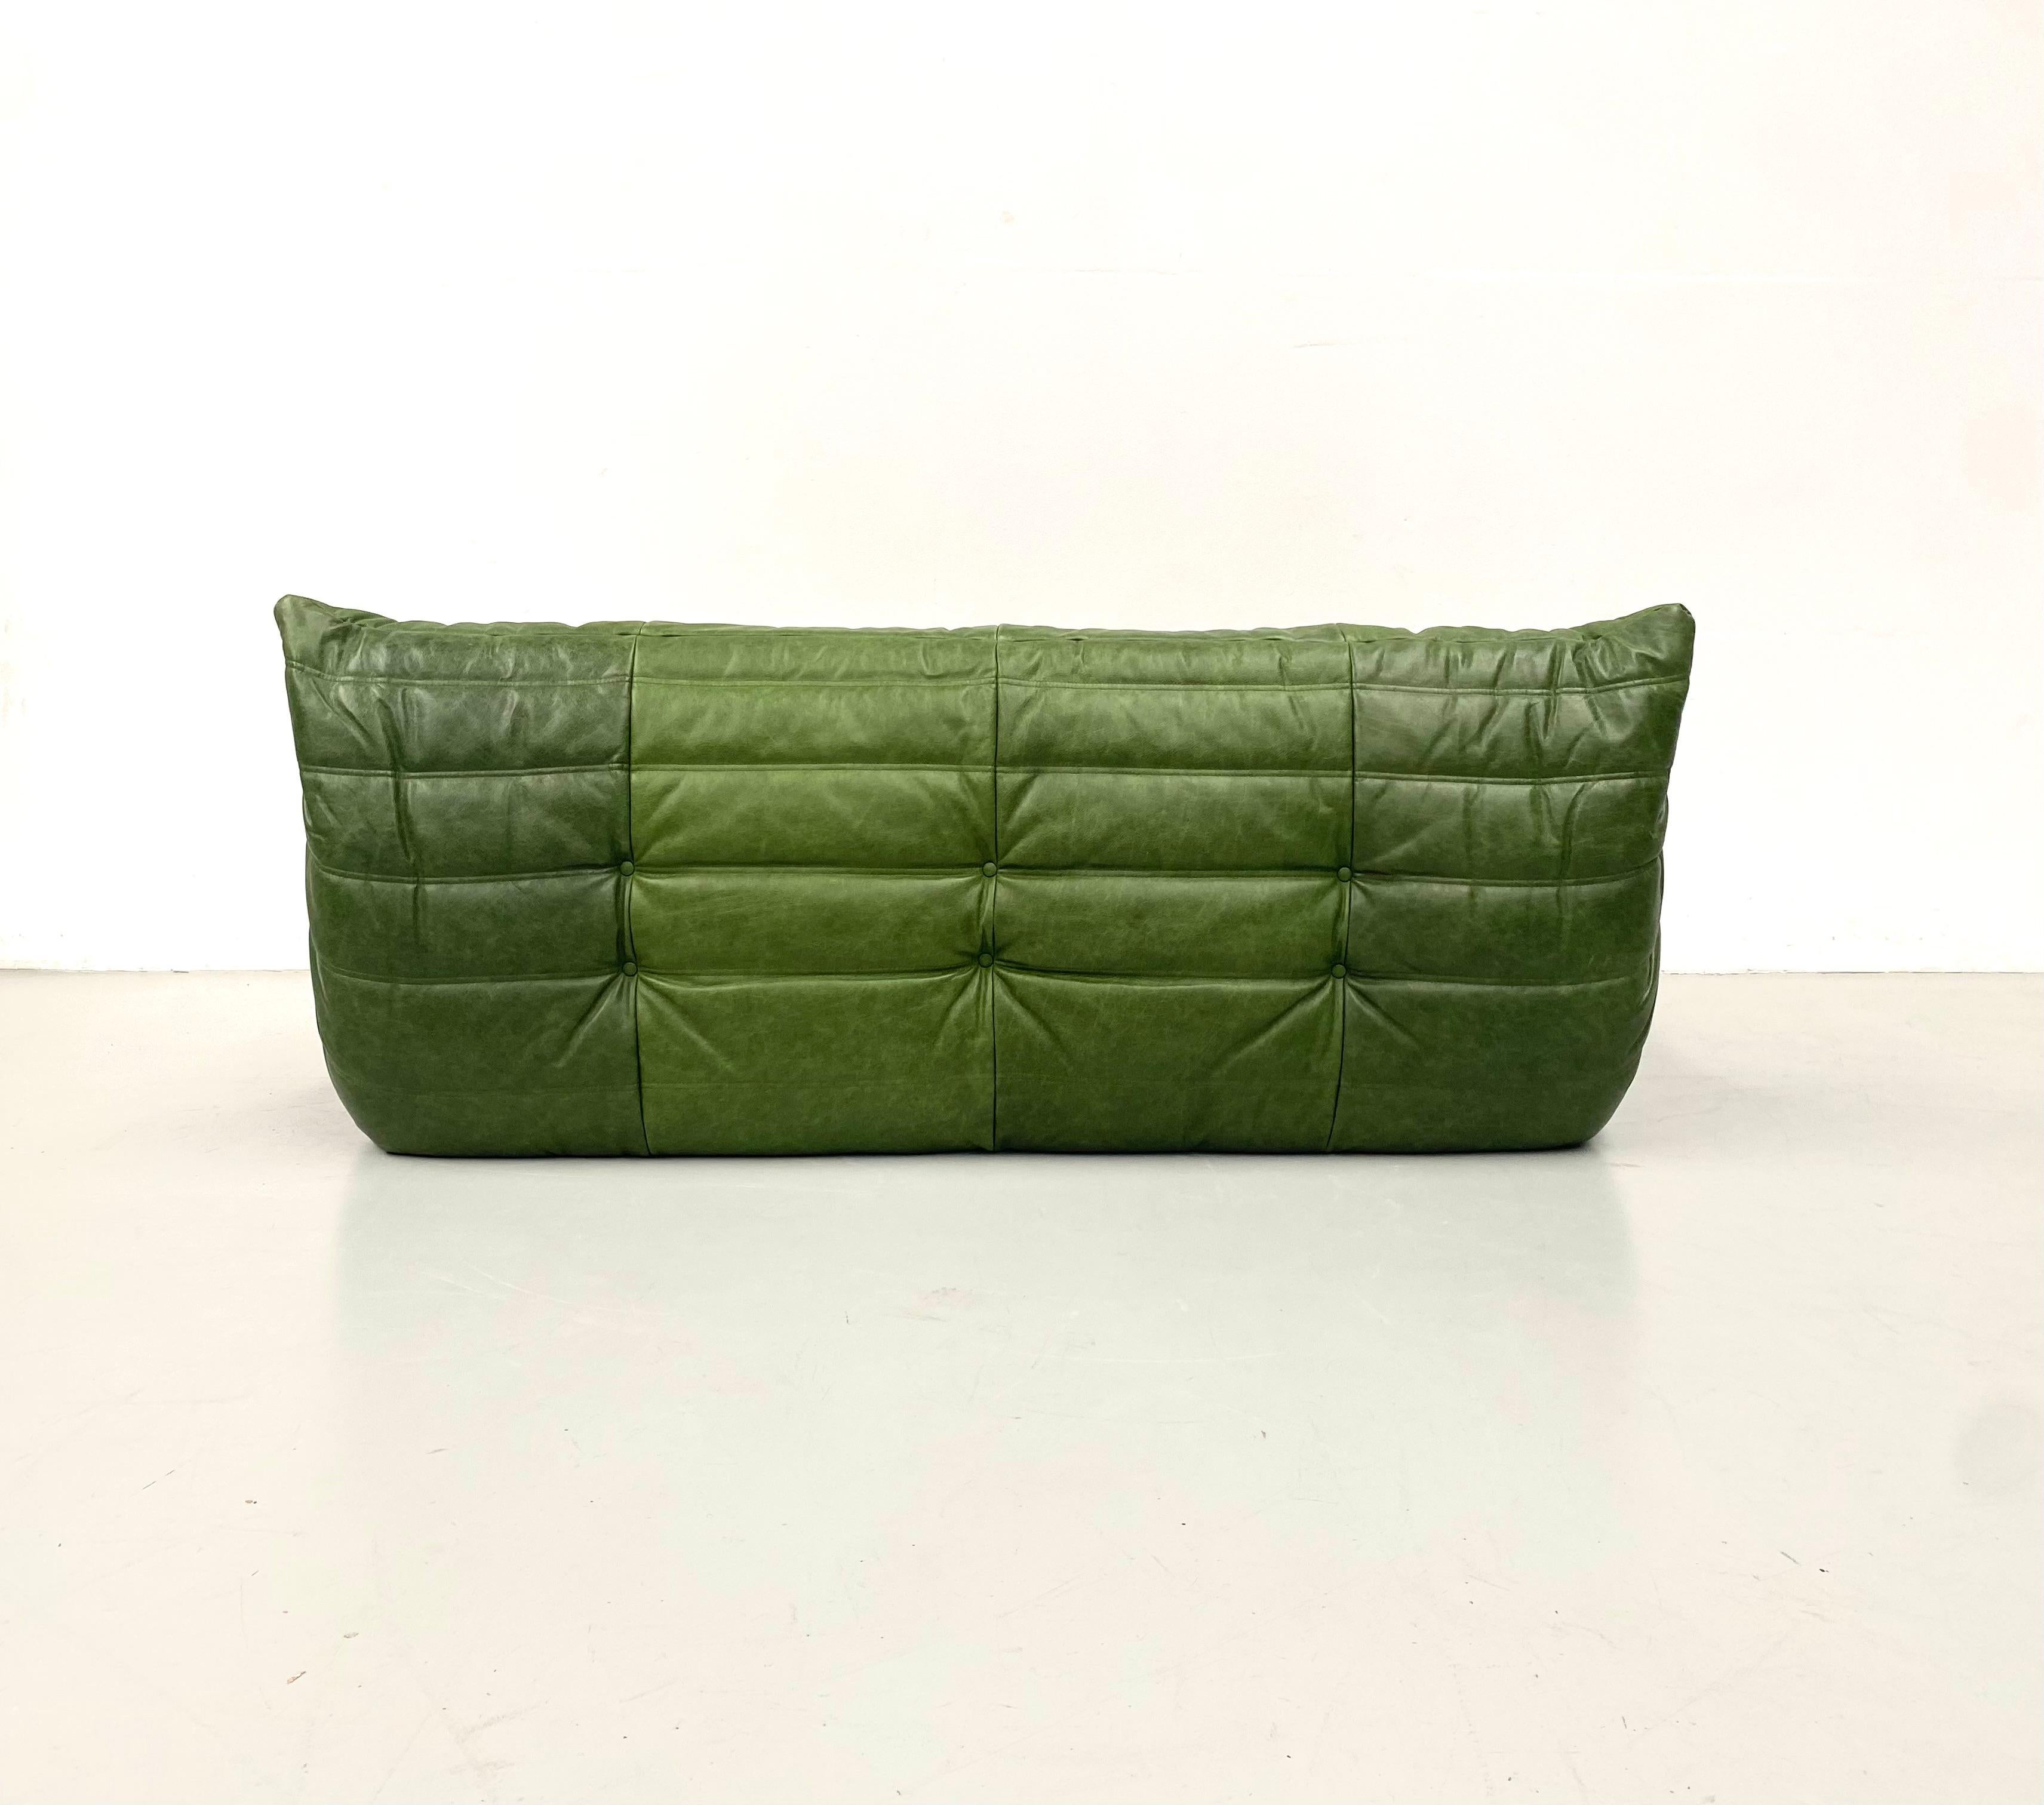 French  Togo Sofa in Green  Leather by Michel Ducaroy for Ligne Roset. For Sale 8